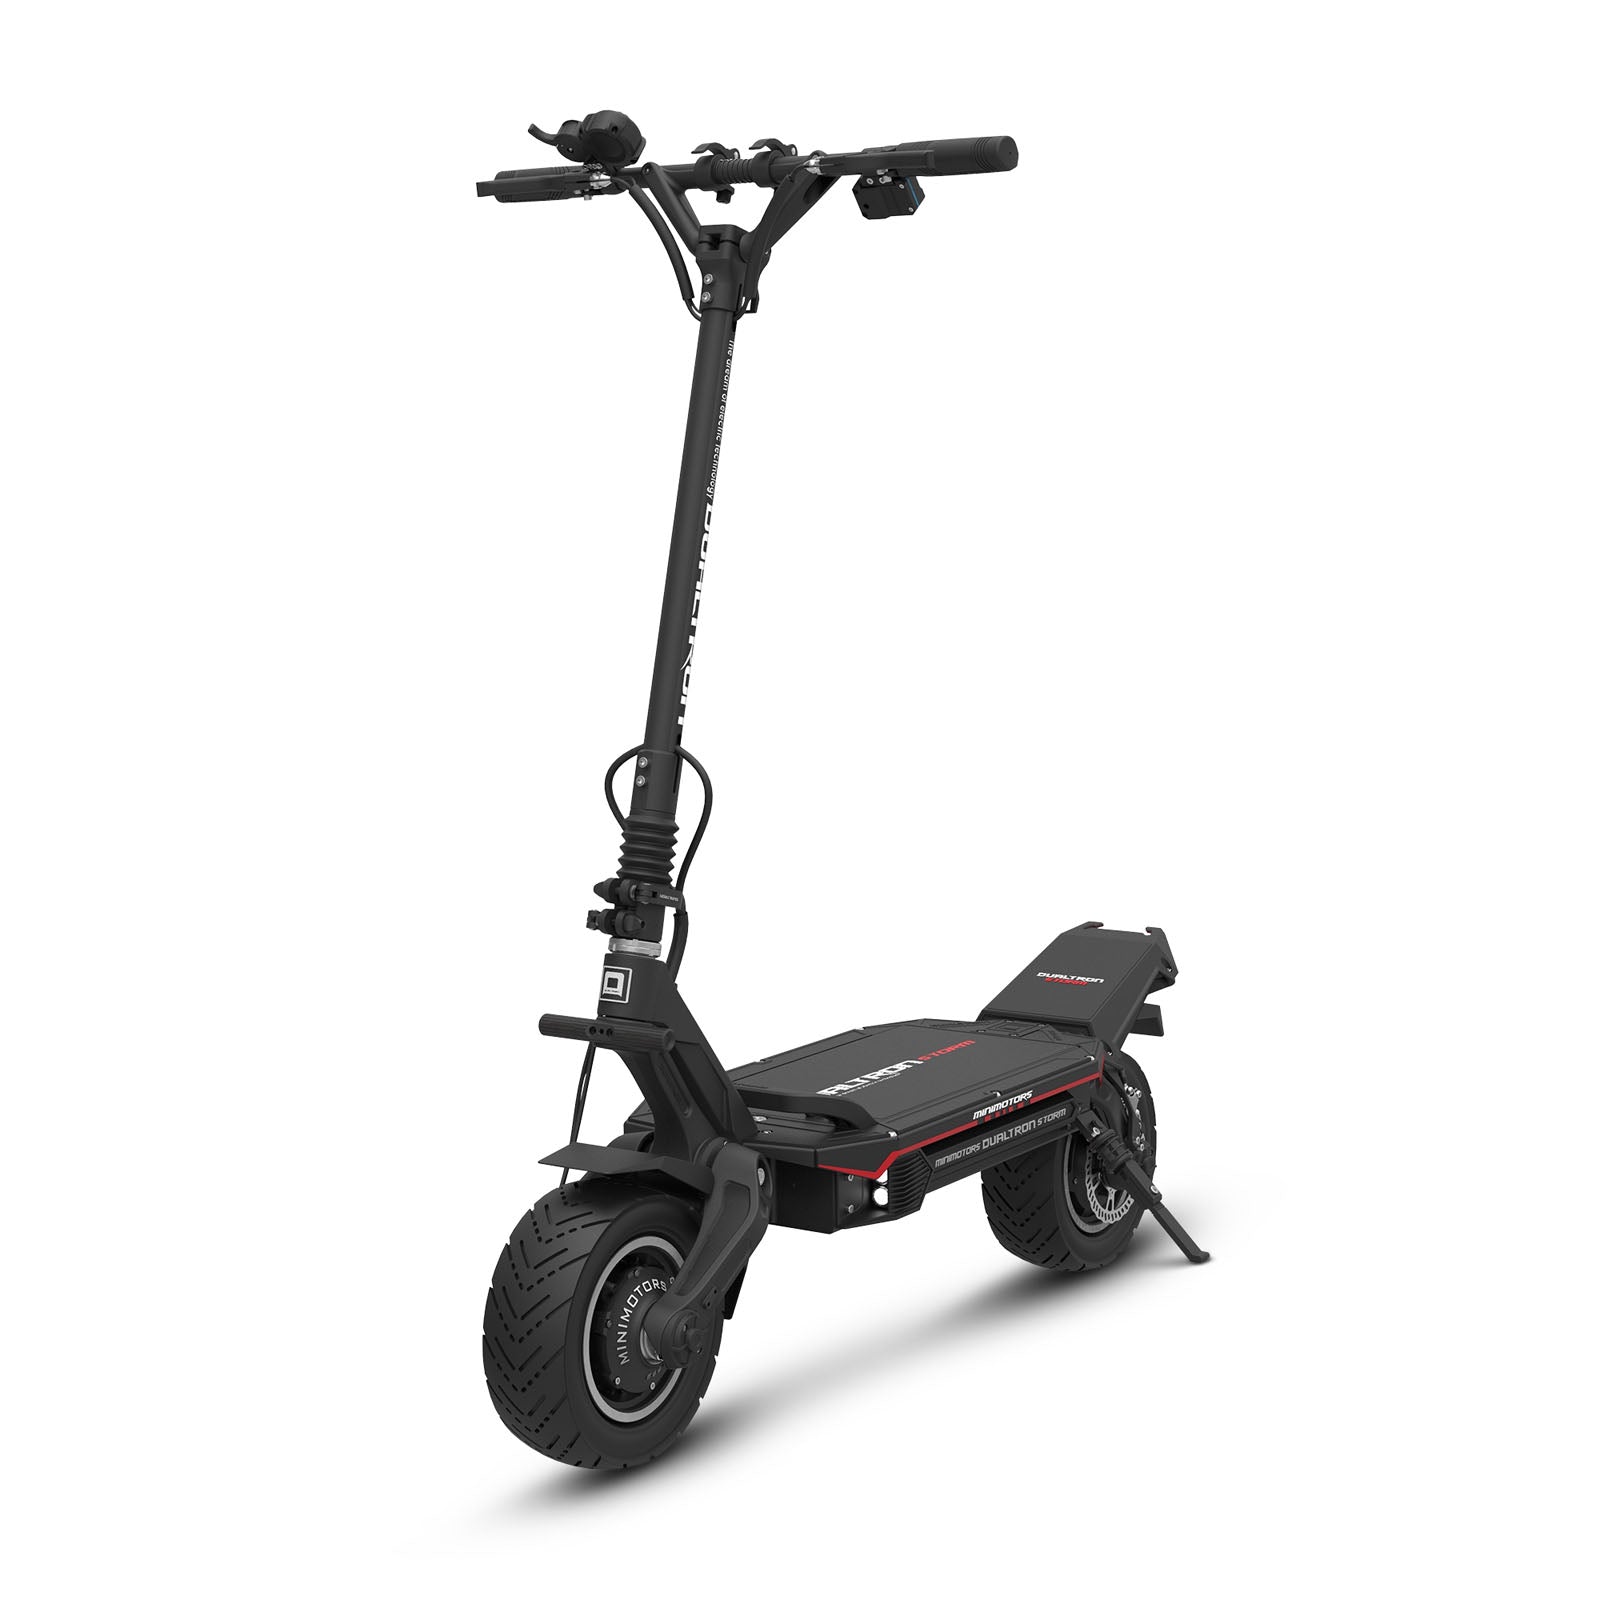 MiniMotors USA - Dualtron and Speedway - Best Electric Scooters